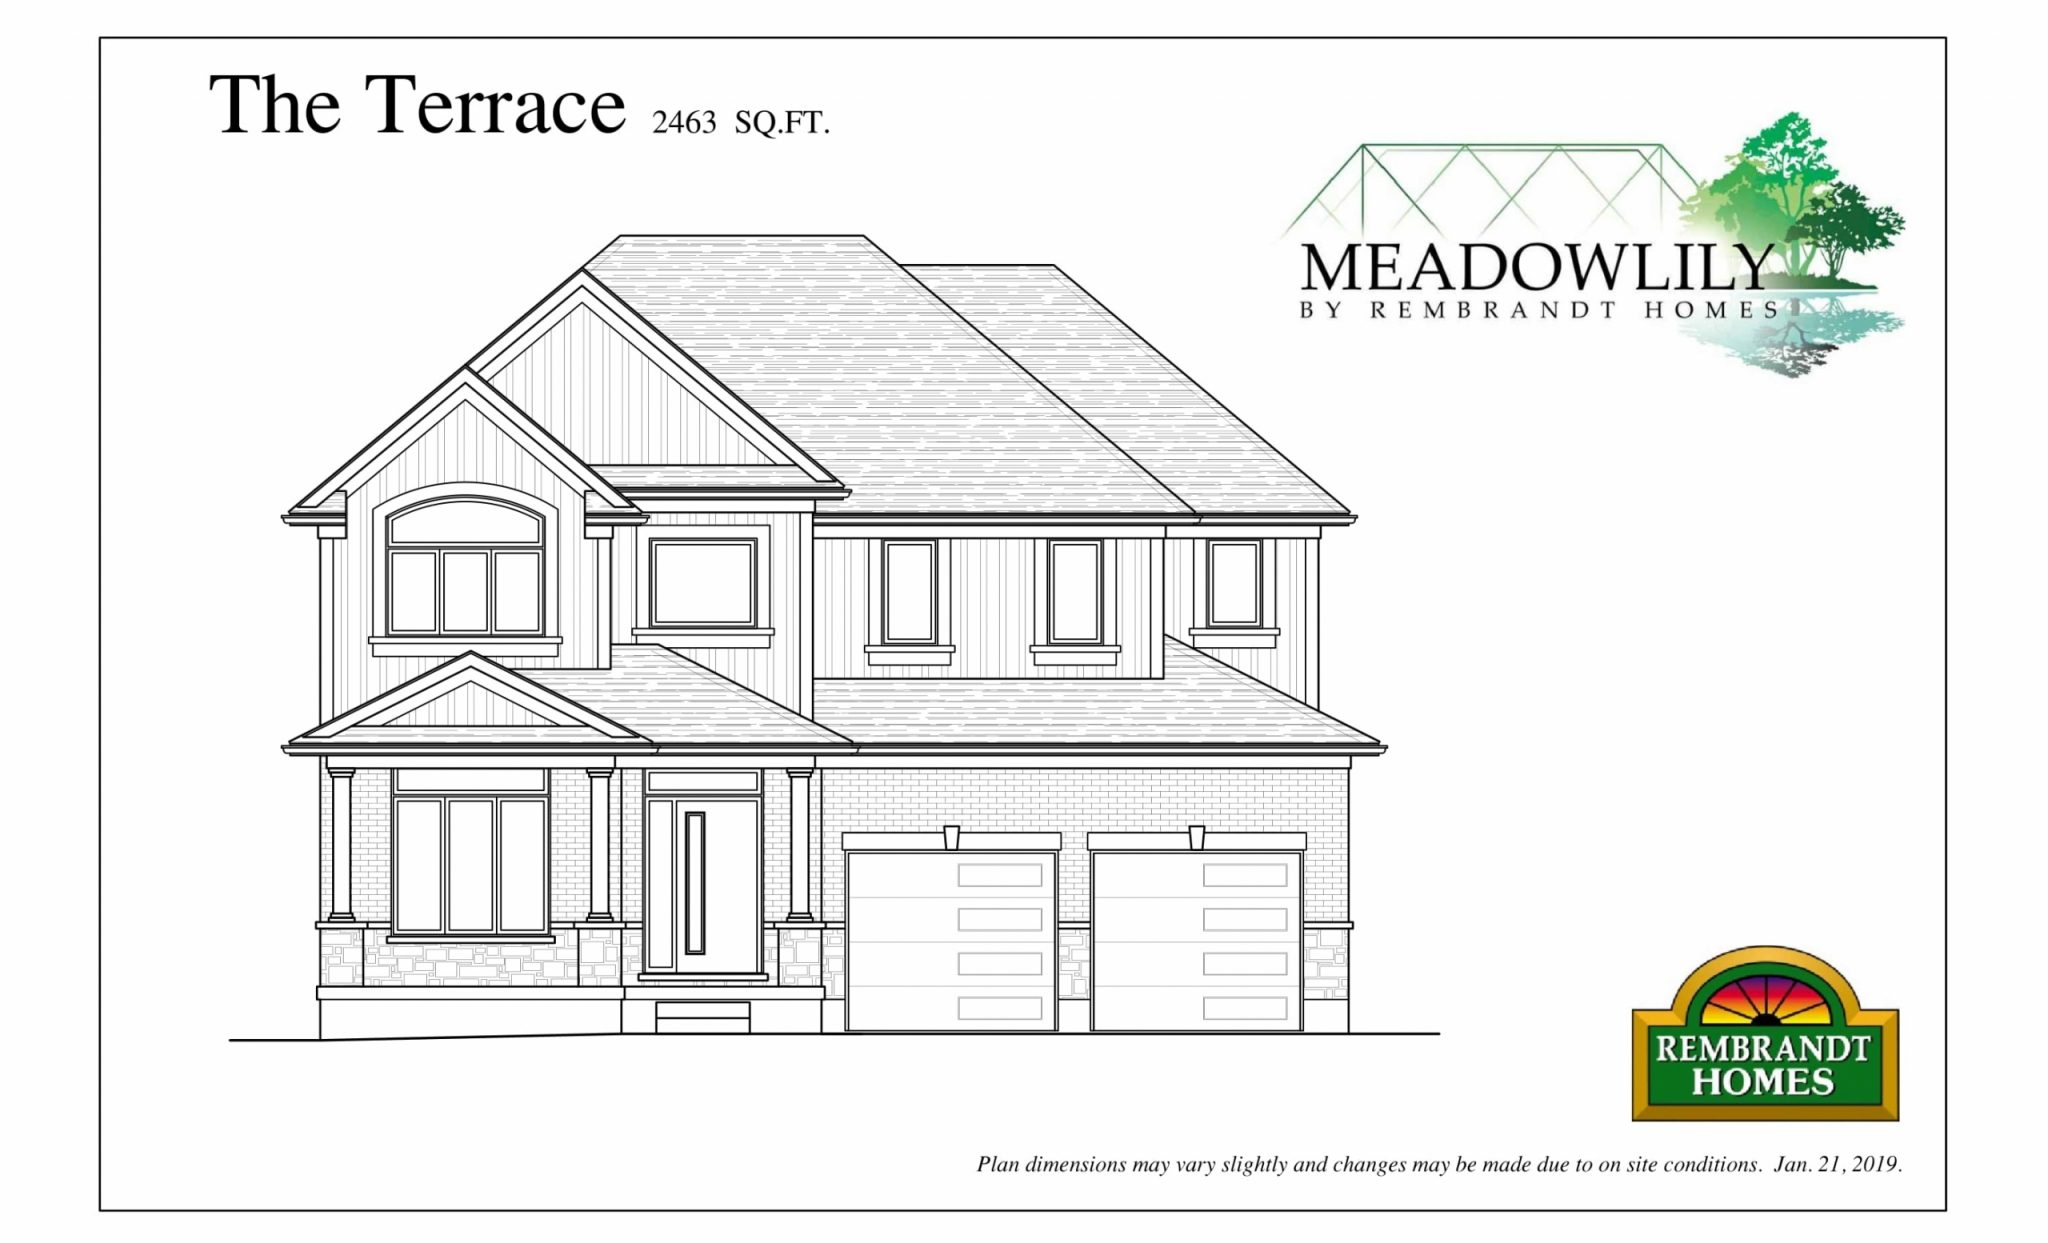 The Terrace - Meadowlily - Build Plan